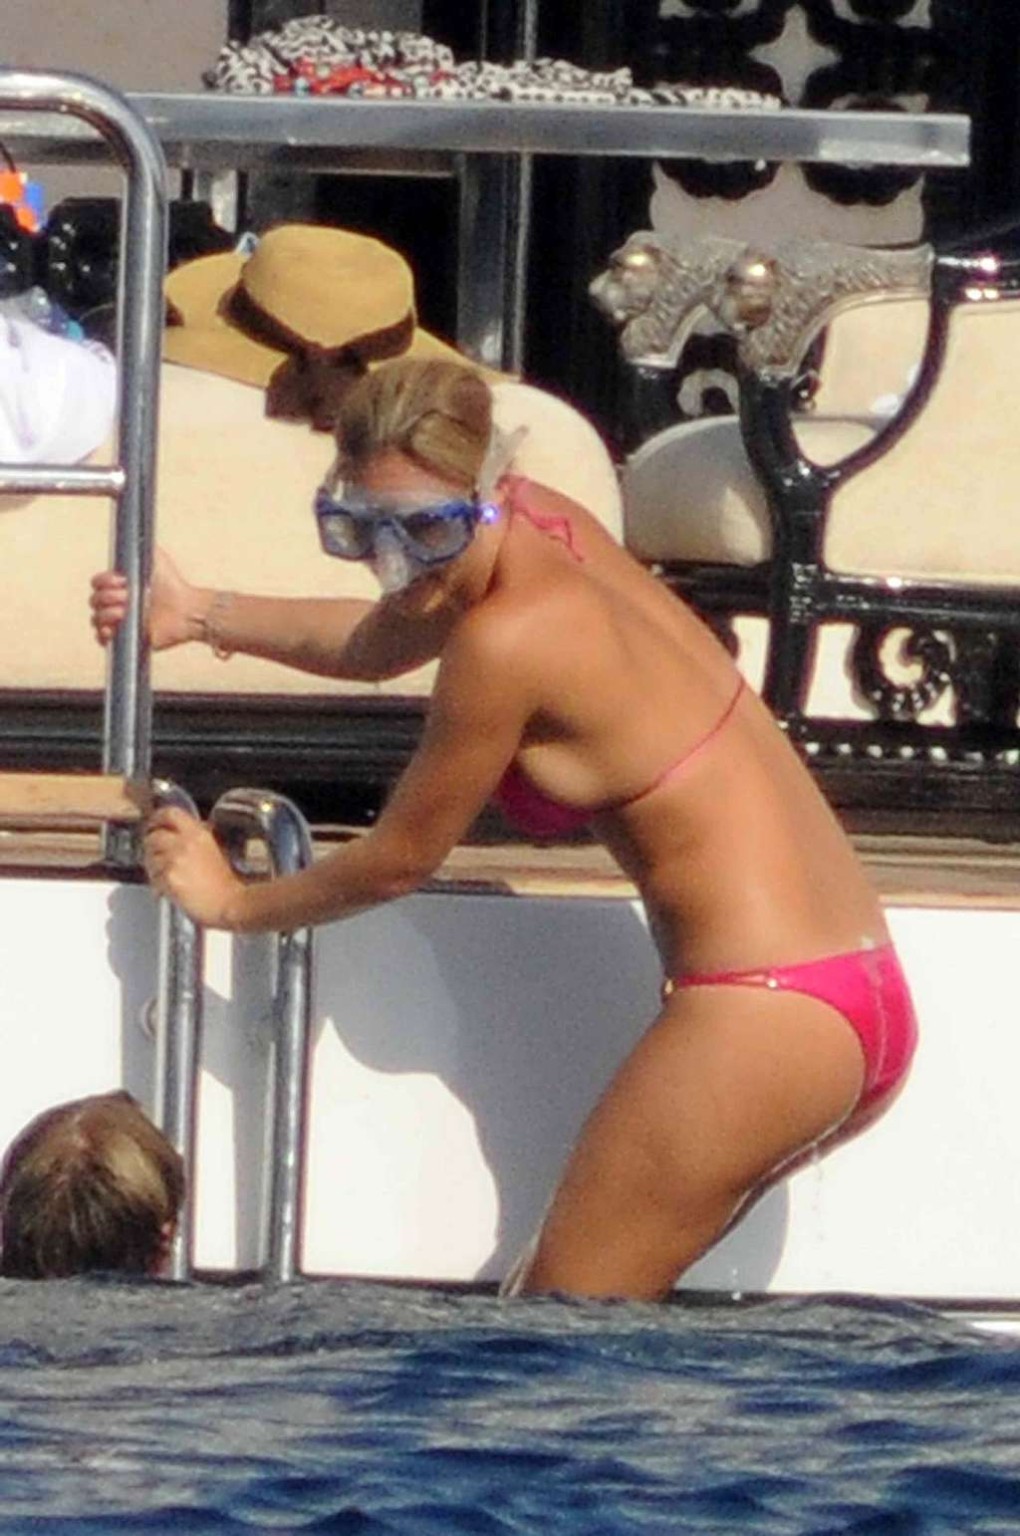 Bar Refaeli looking very sexy in red bikini on yacht paparazzi pictures #75336855